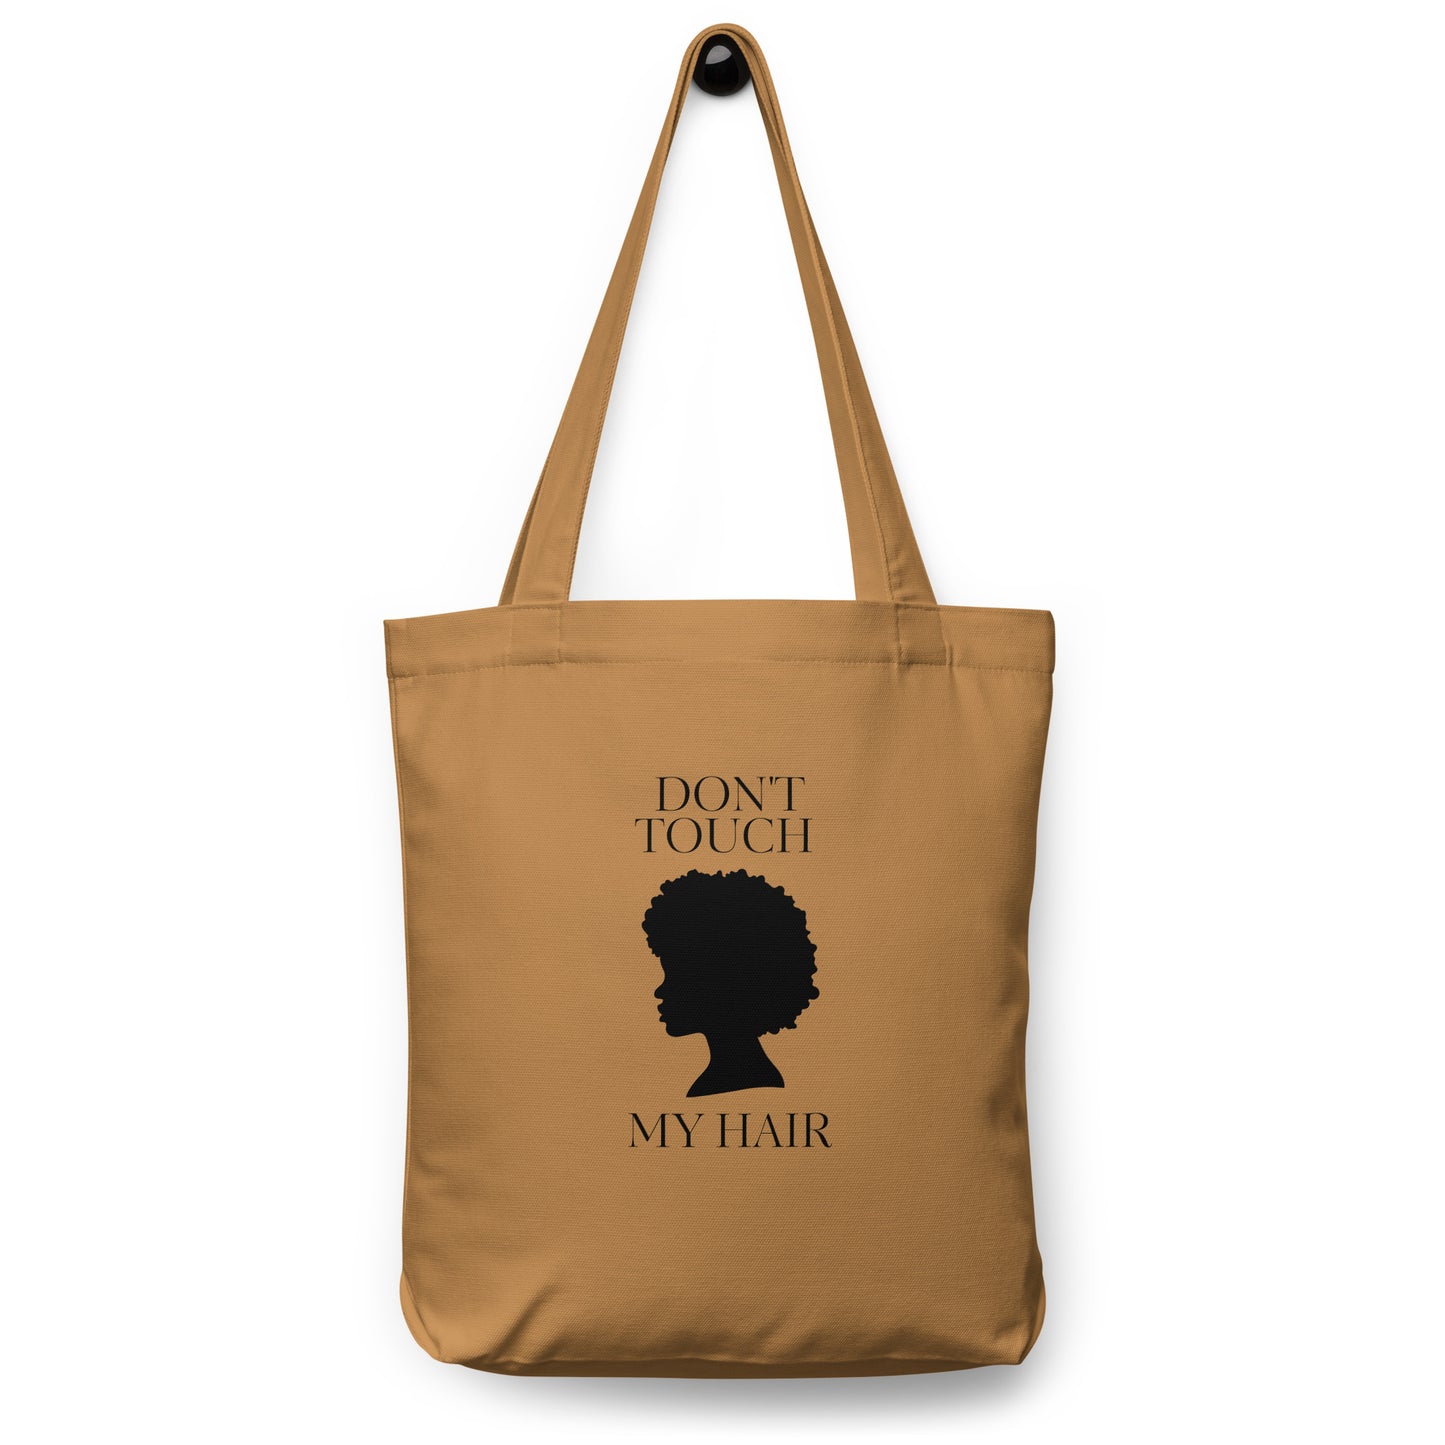 "Don't Touch My Hair" Tote Bag